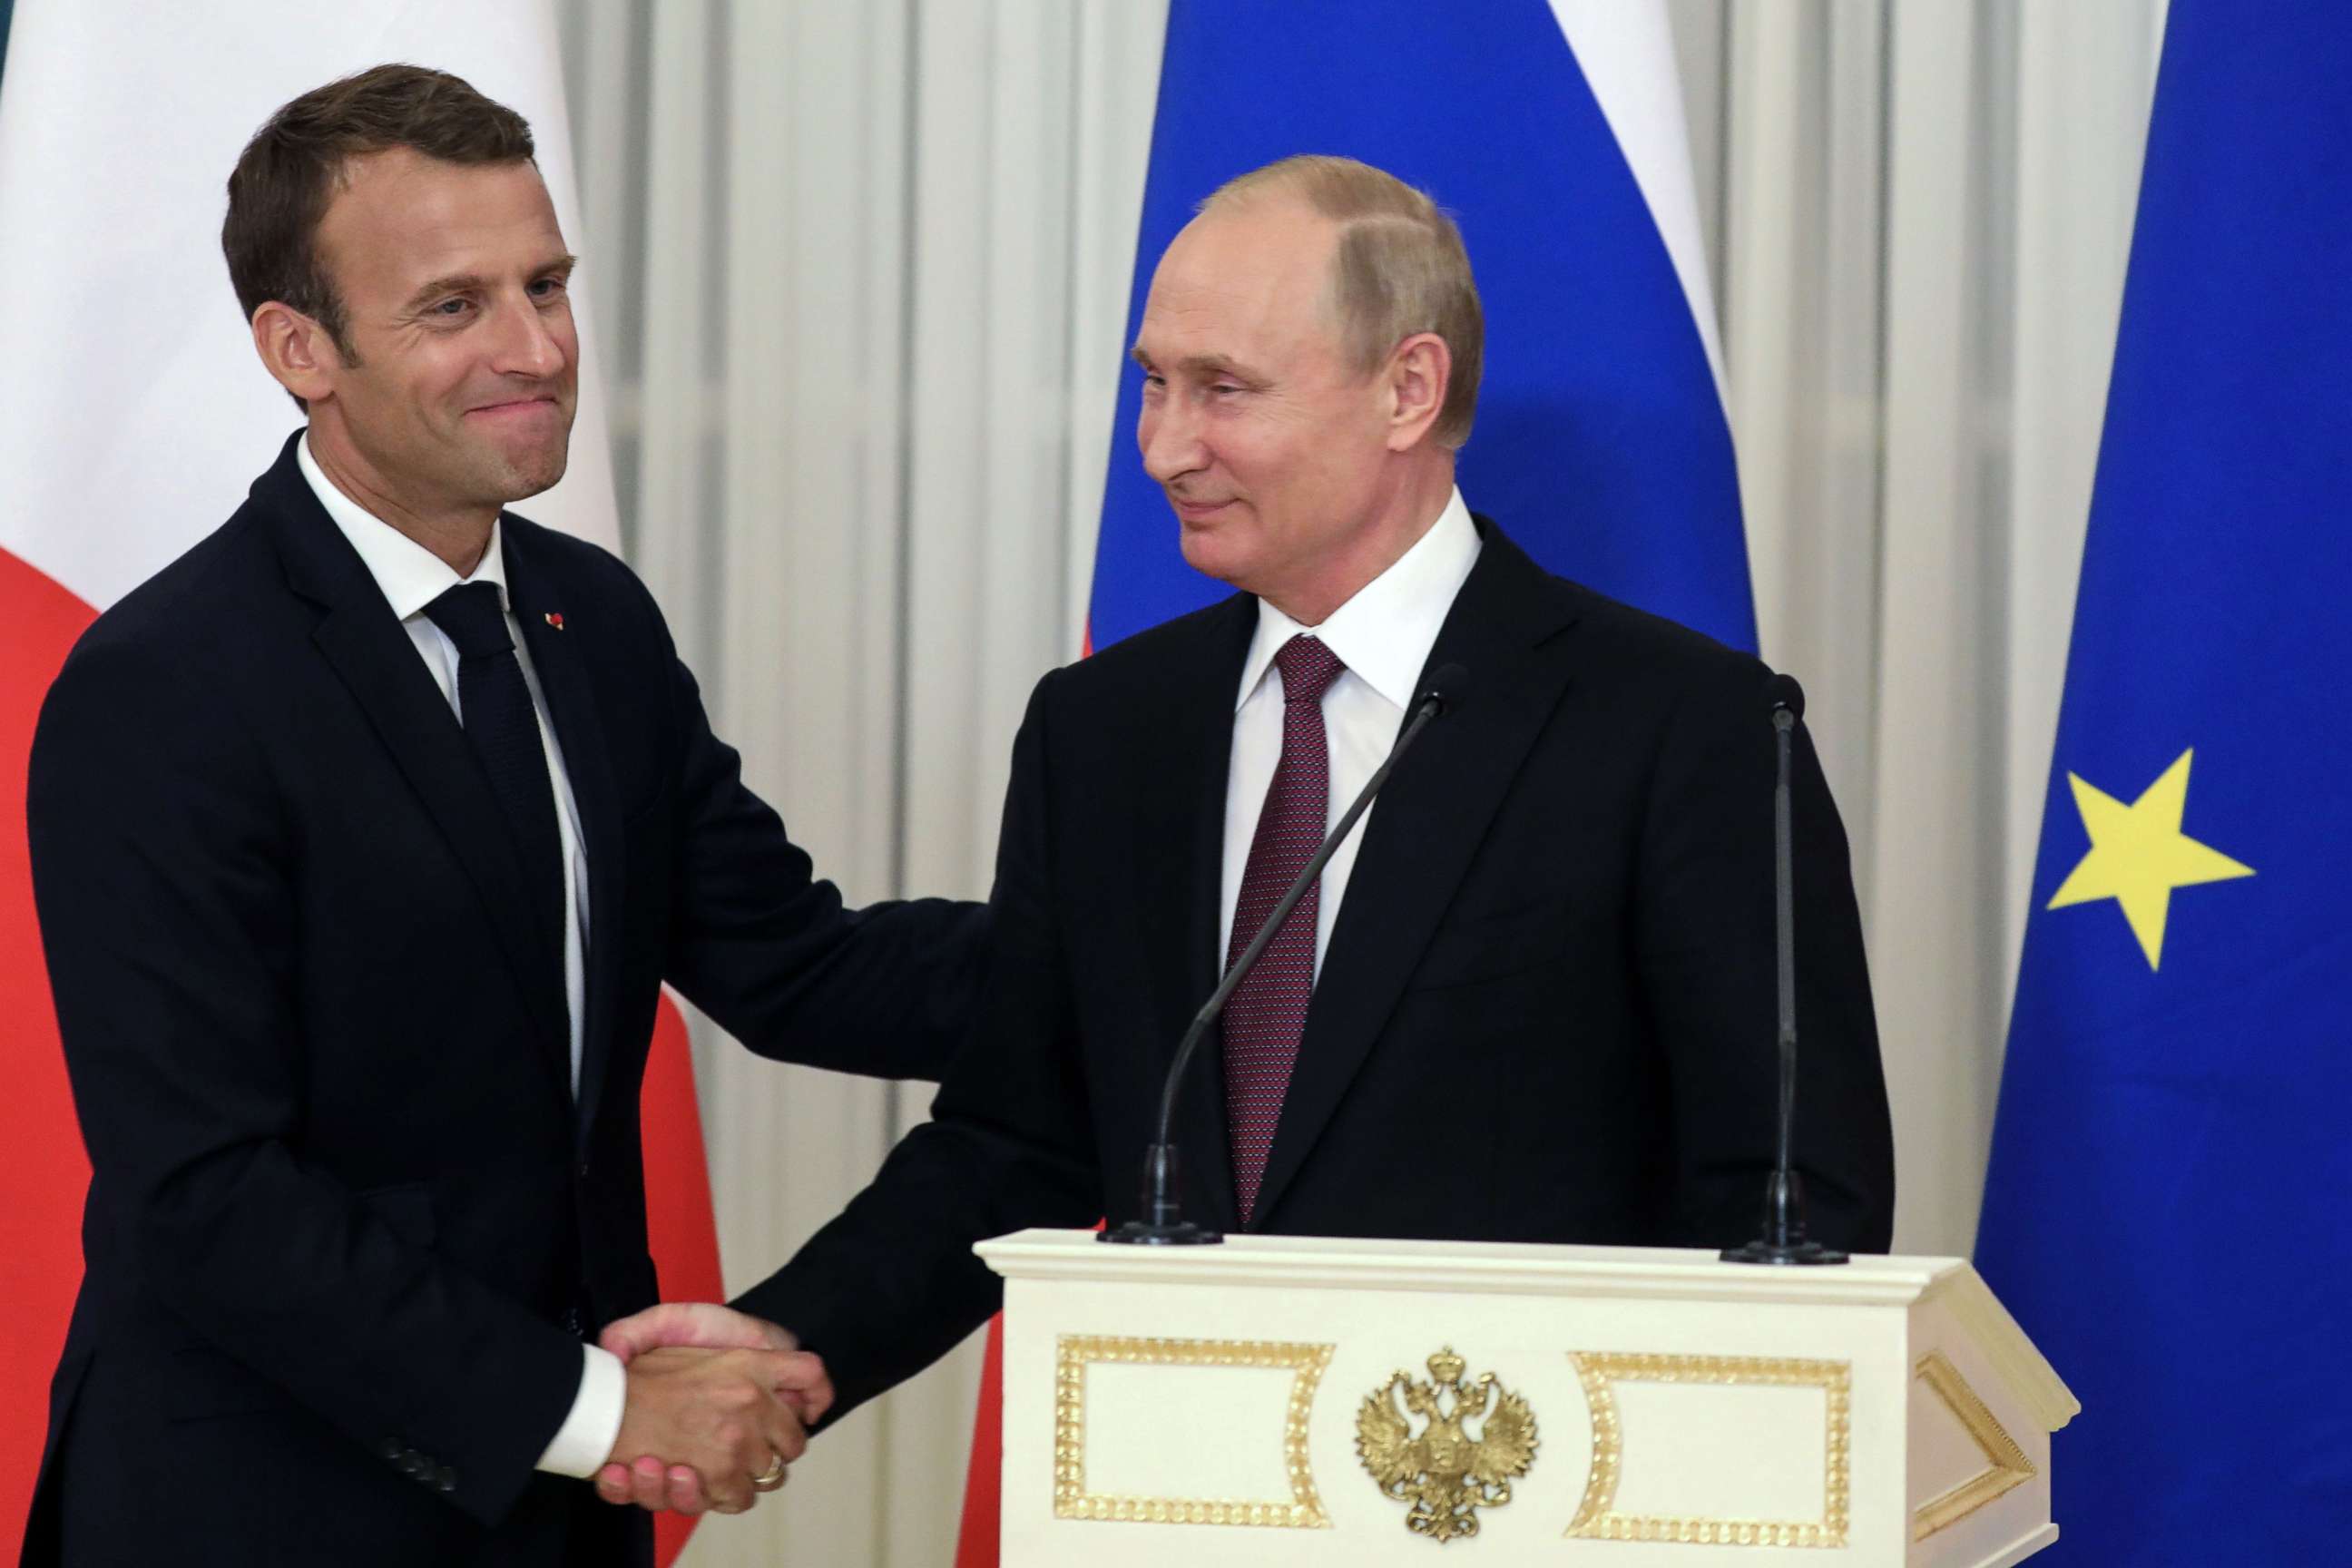 PHOTO: Russian President Vladimir Putin shakes hands with French President Emmanuel Macron at the end of a joint press conference in Saint Petersburg, Russia, May 24, 2018.